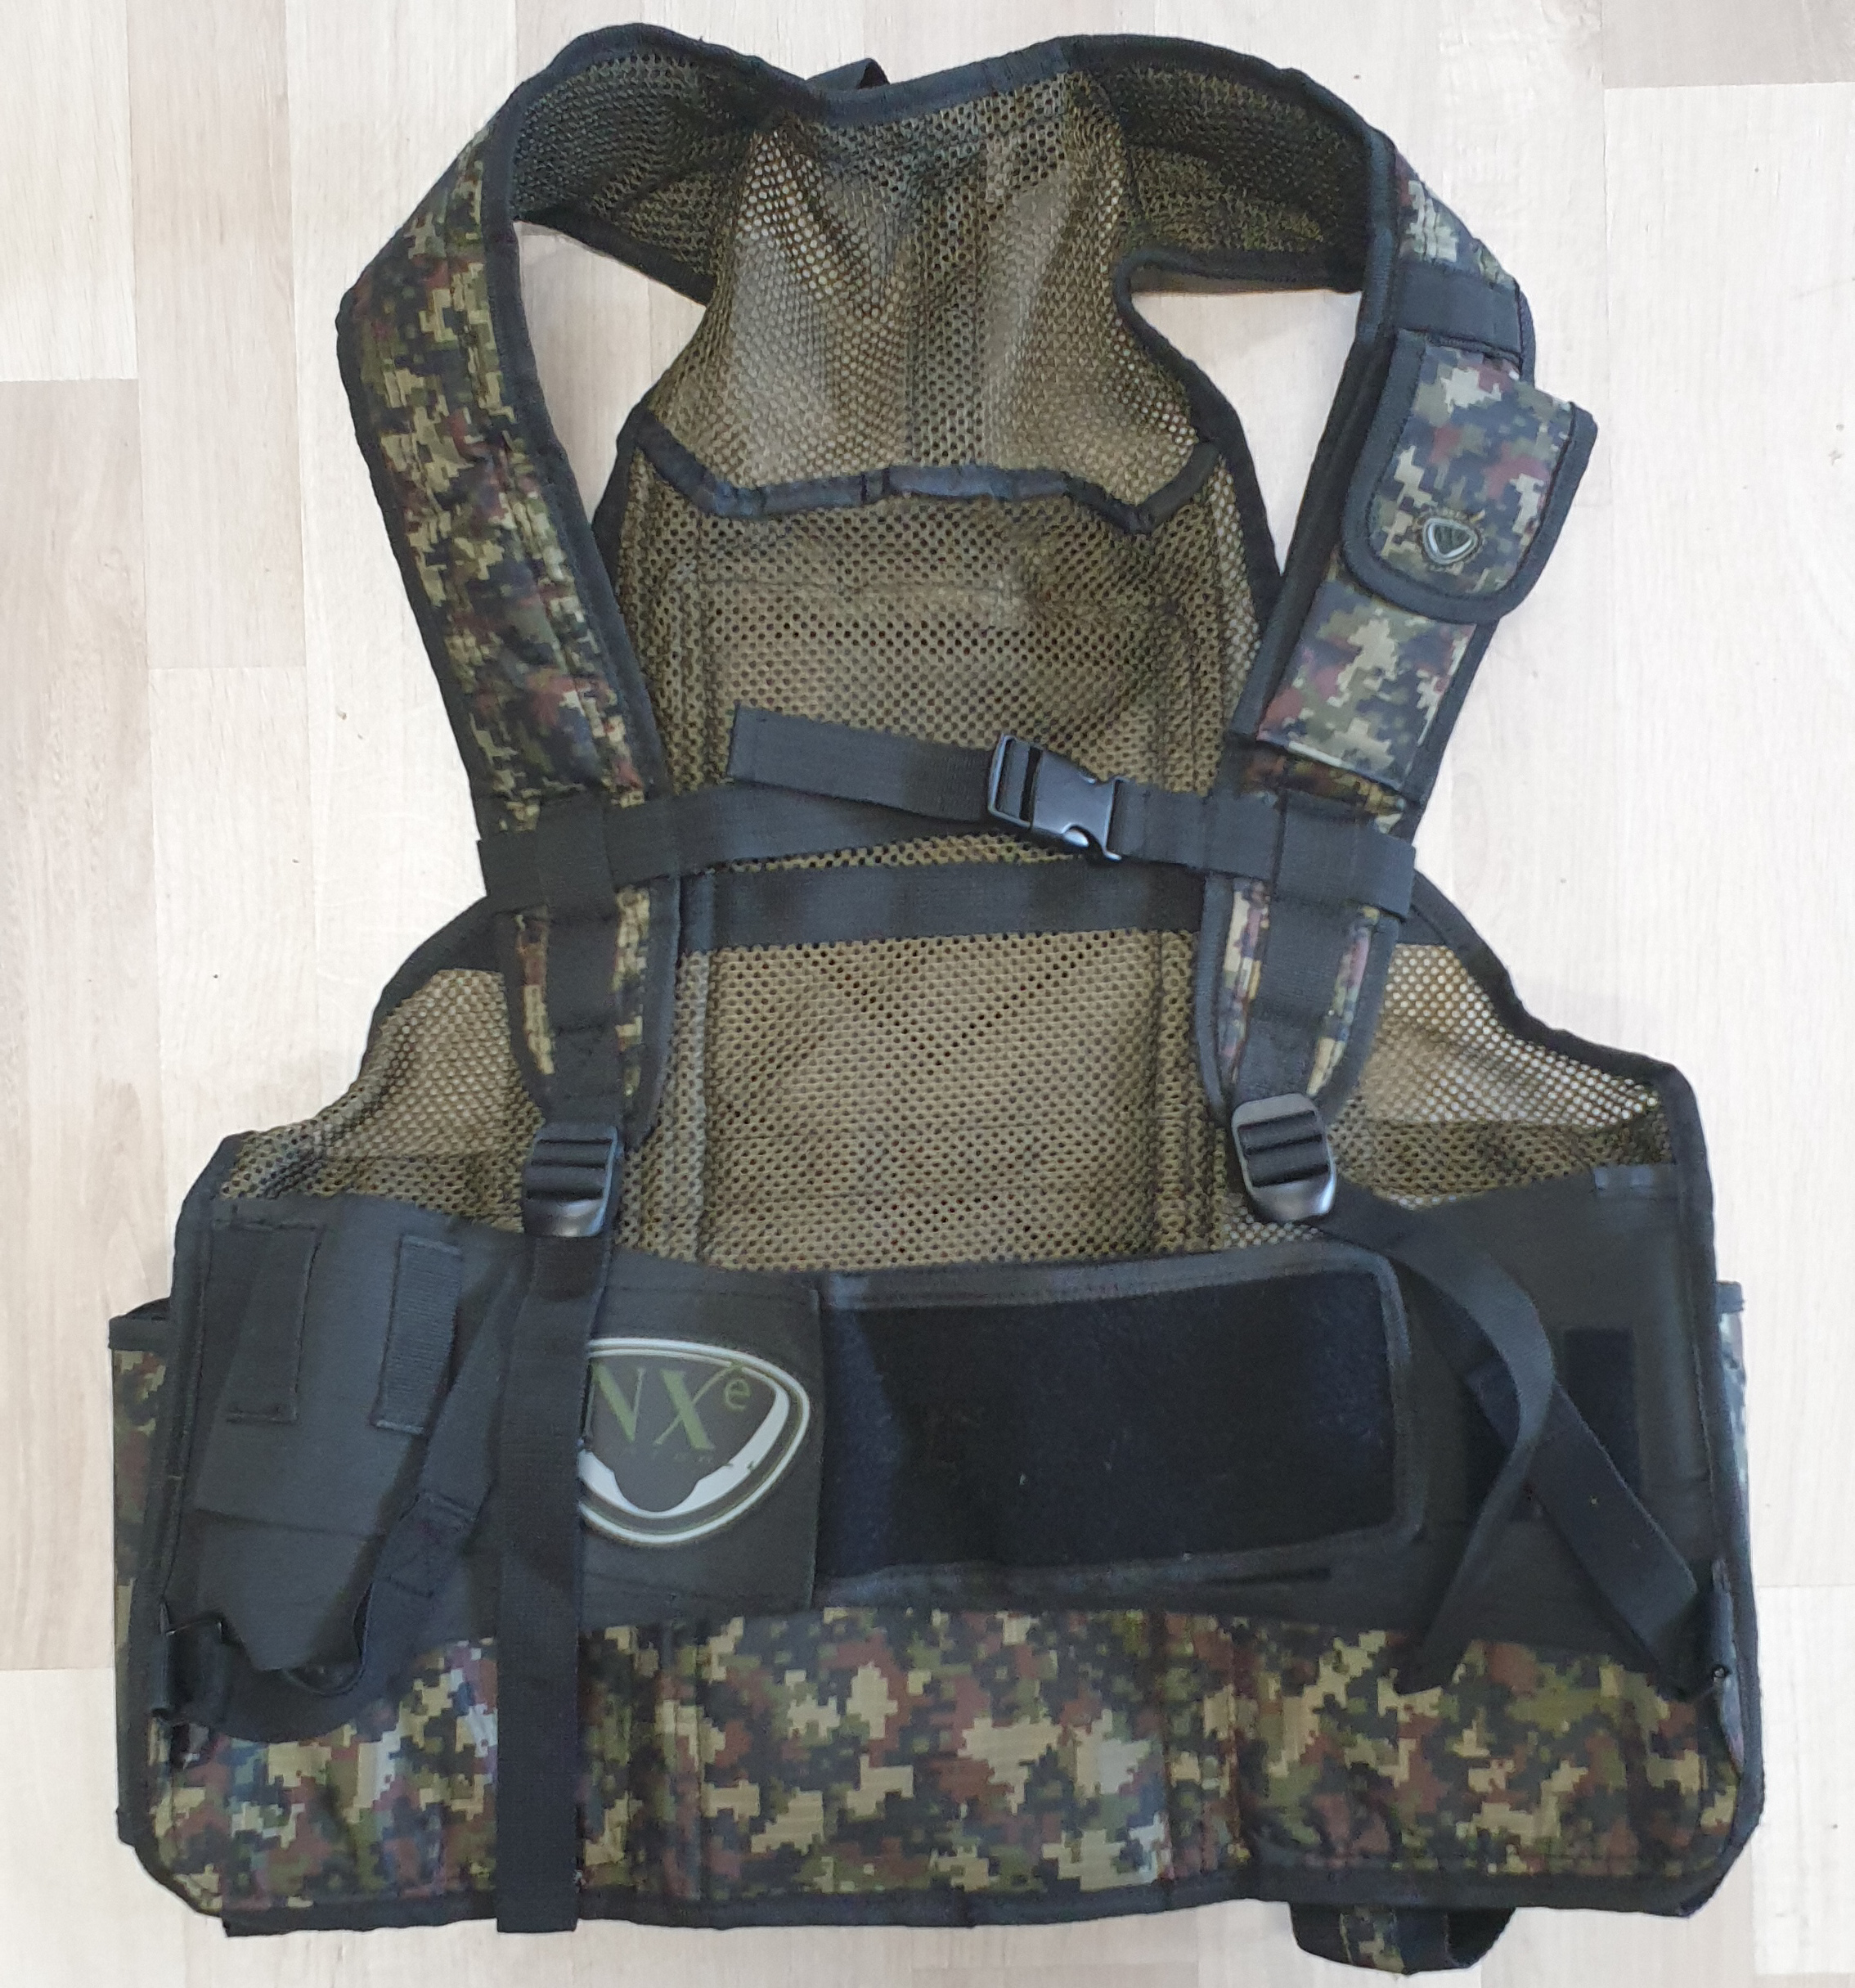 NXe Tactical Vest - USED